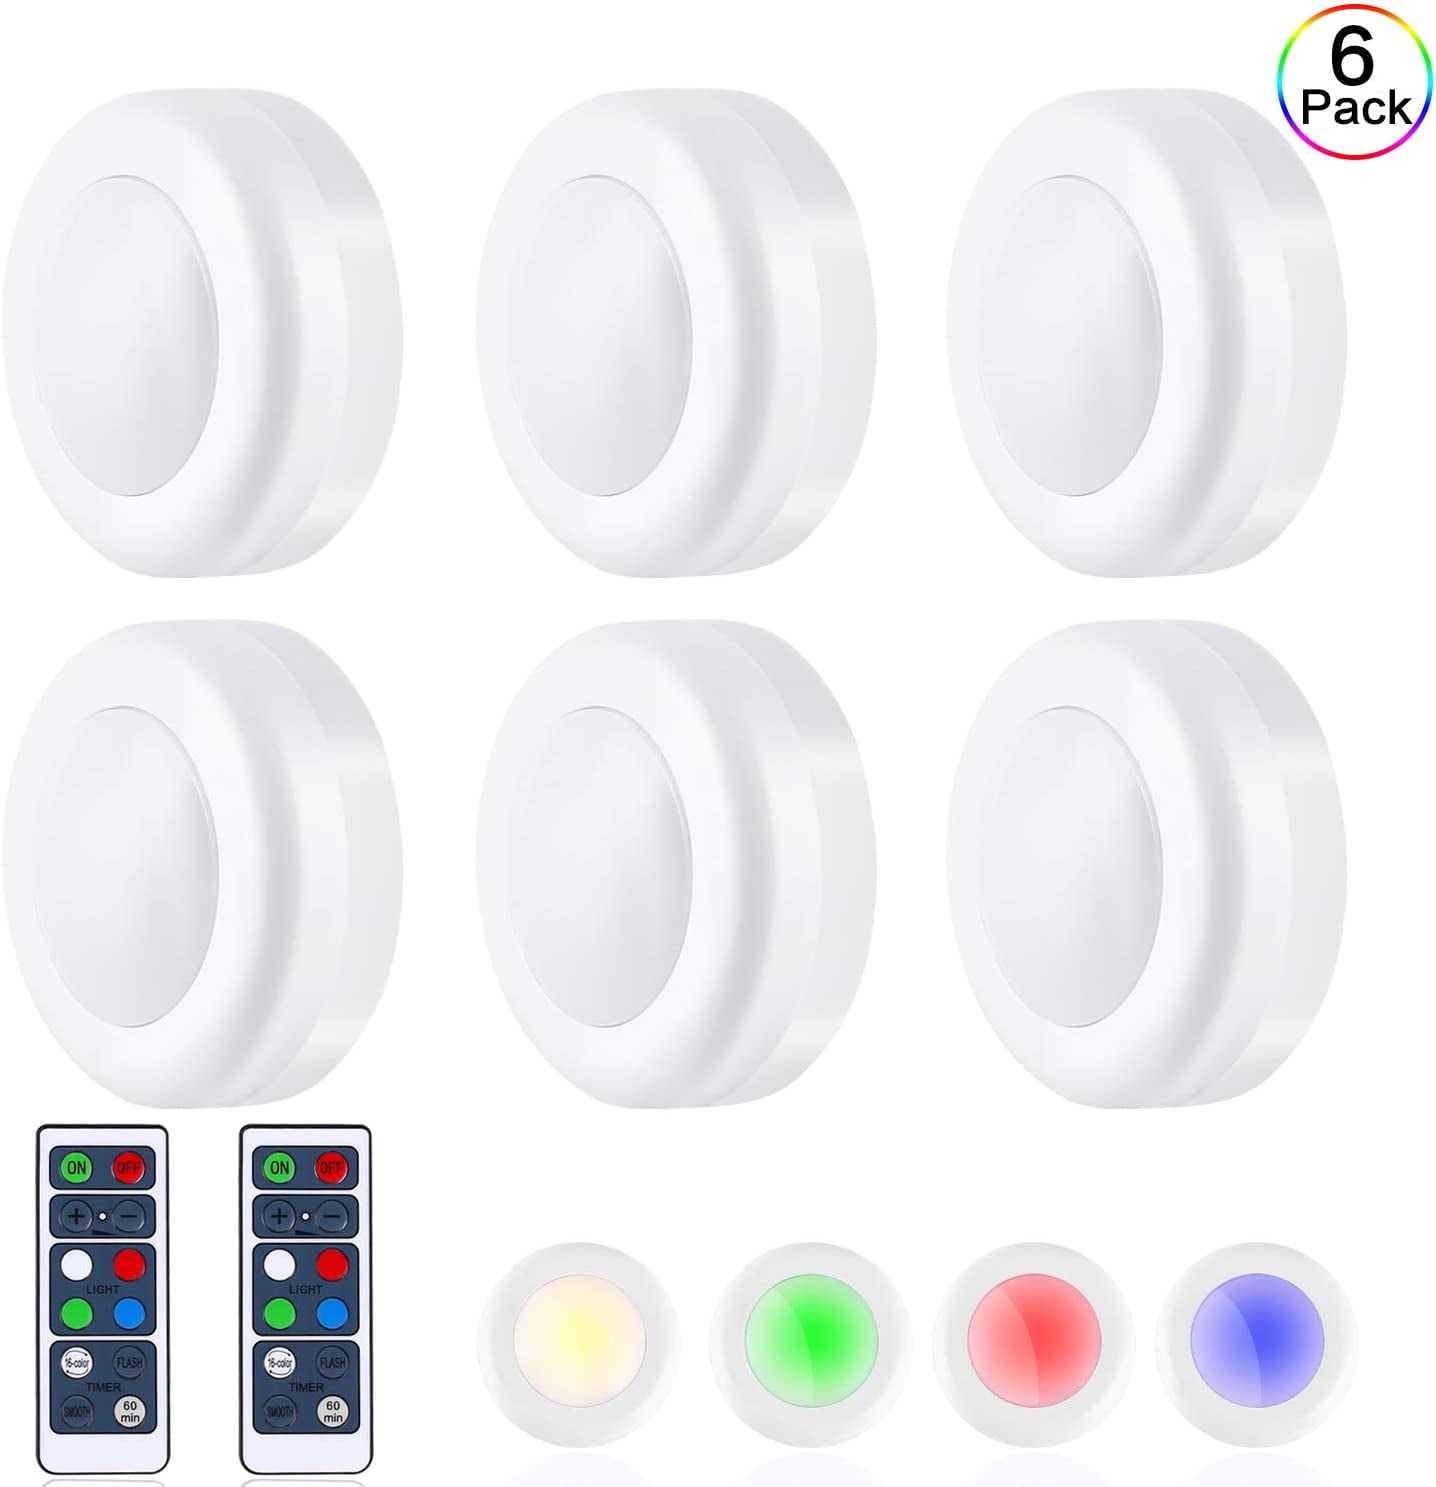 3 Stick On LED Push Lights Self Adhesive Button Light Remote Dimmer Timer Bright 